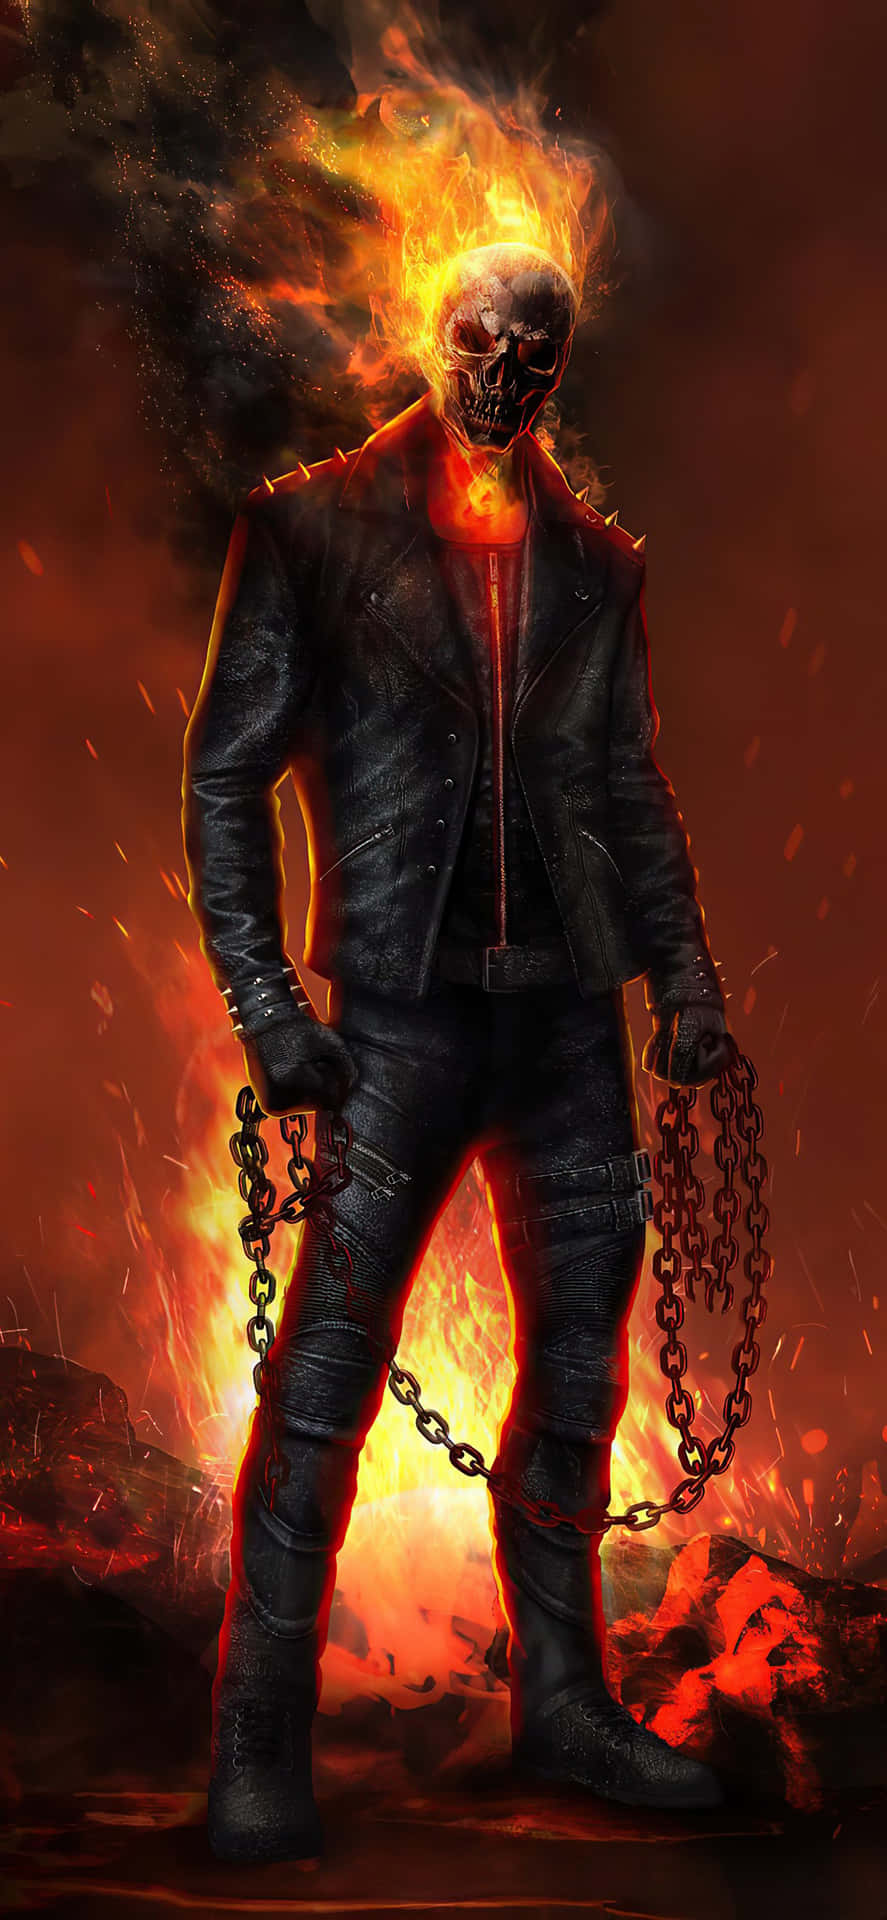 Unleash the power of the Ghost Rider in this intense, fiery image"